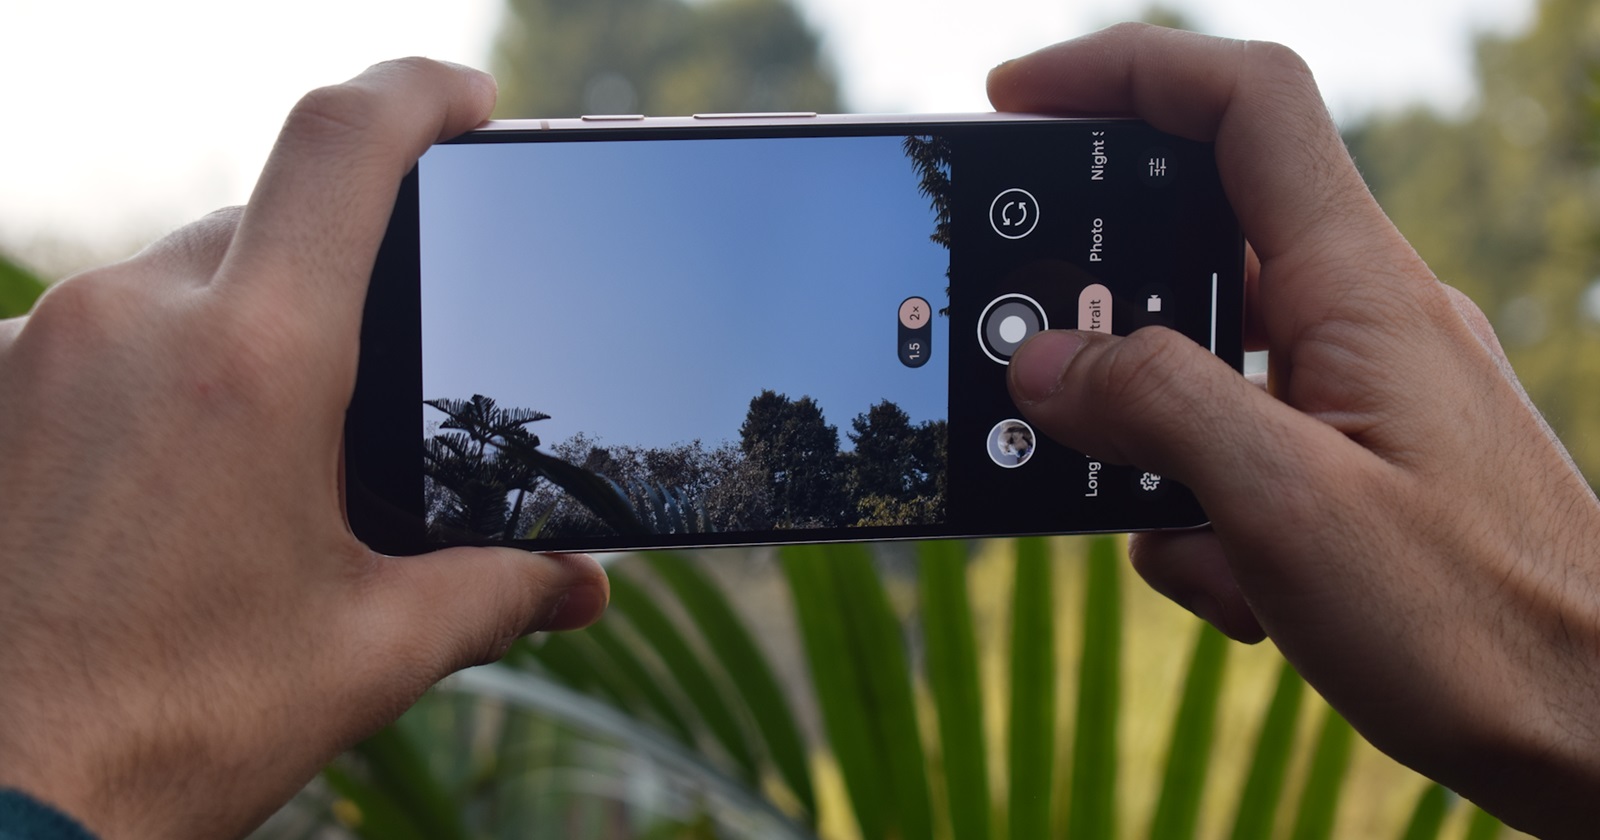 You can now share Ultra HDR photos and 10-bit HDR videos on Reels on Instagram from your Pixel phone